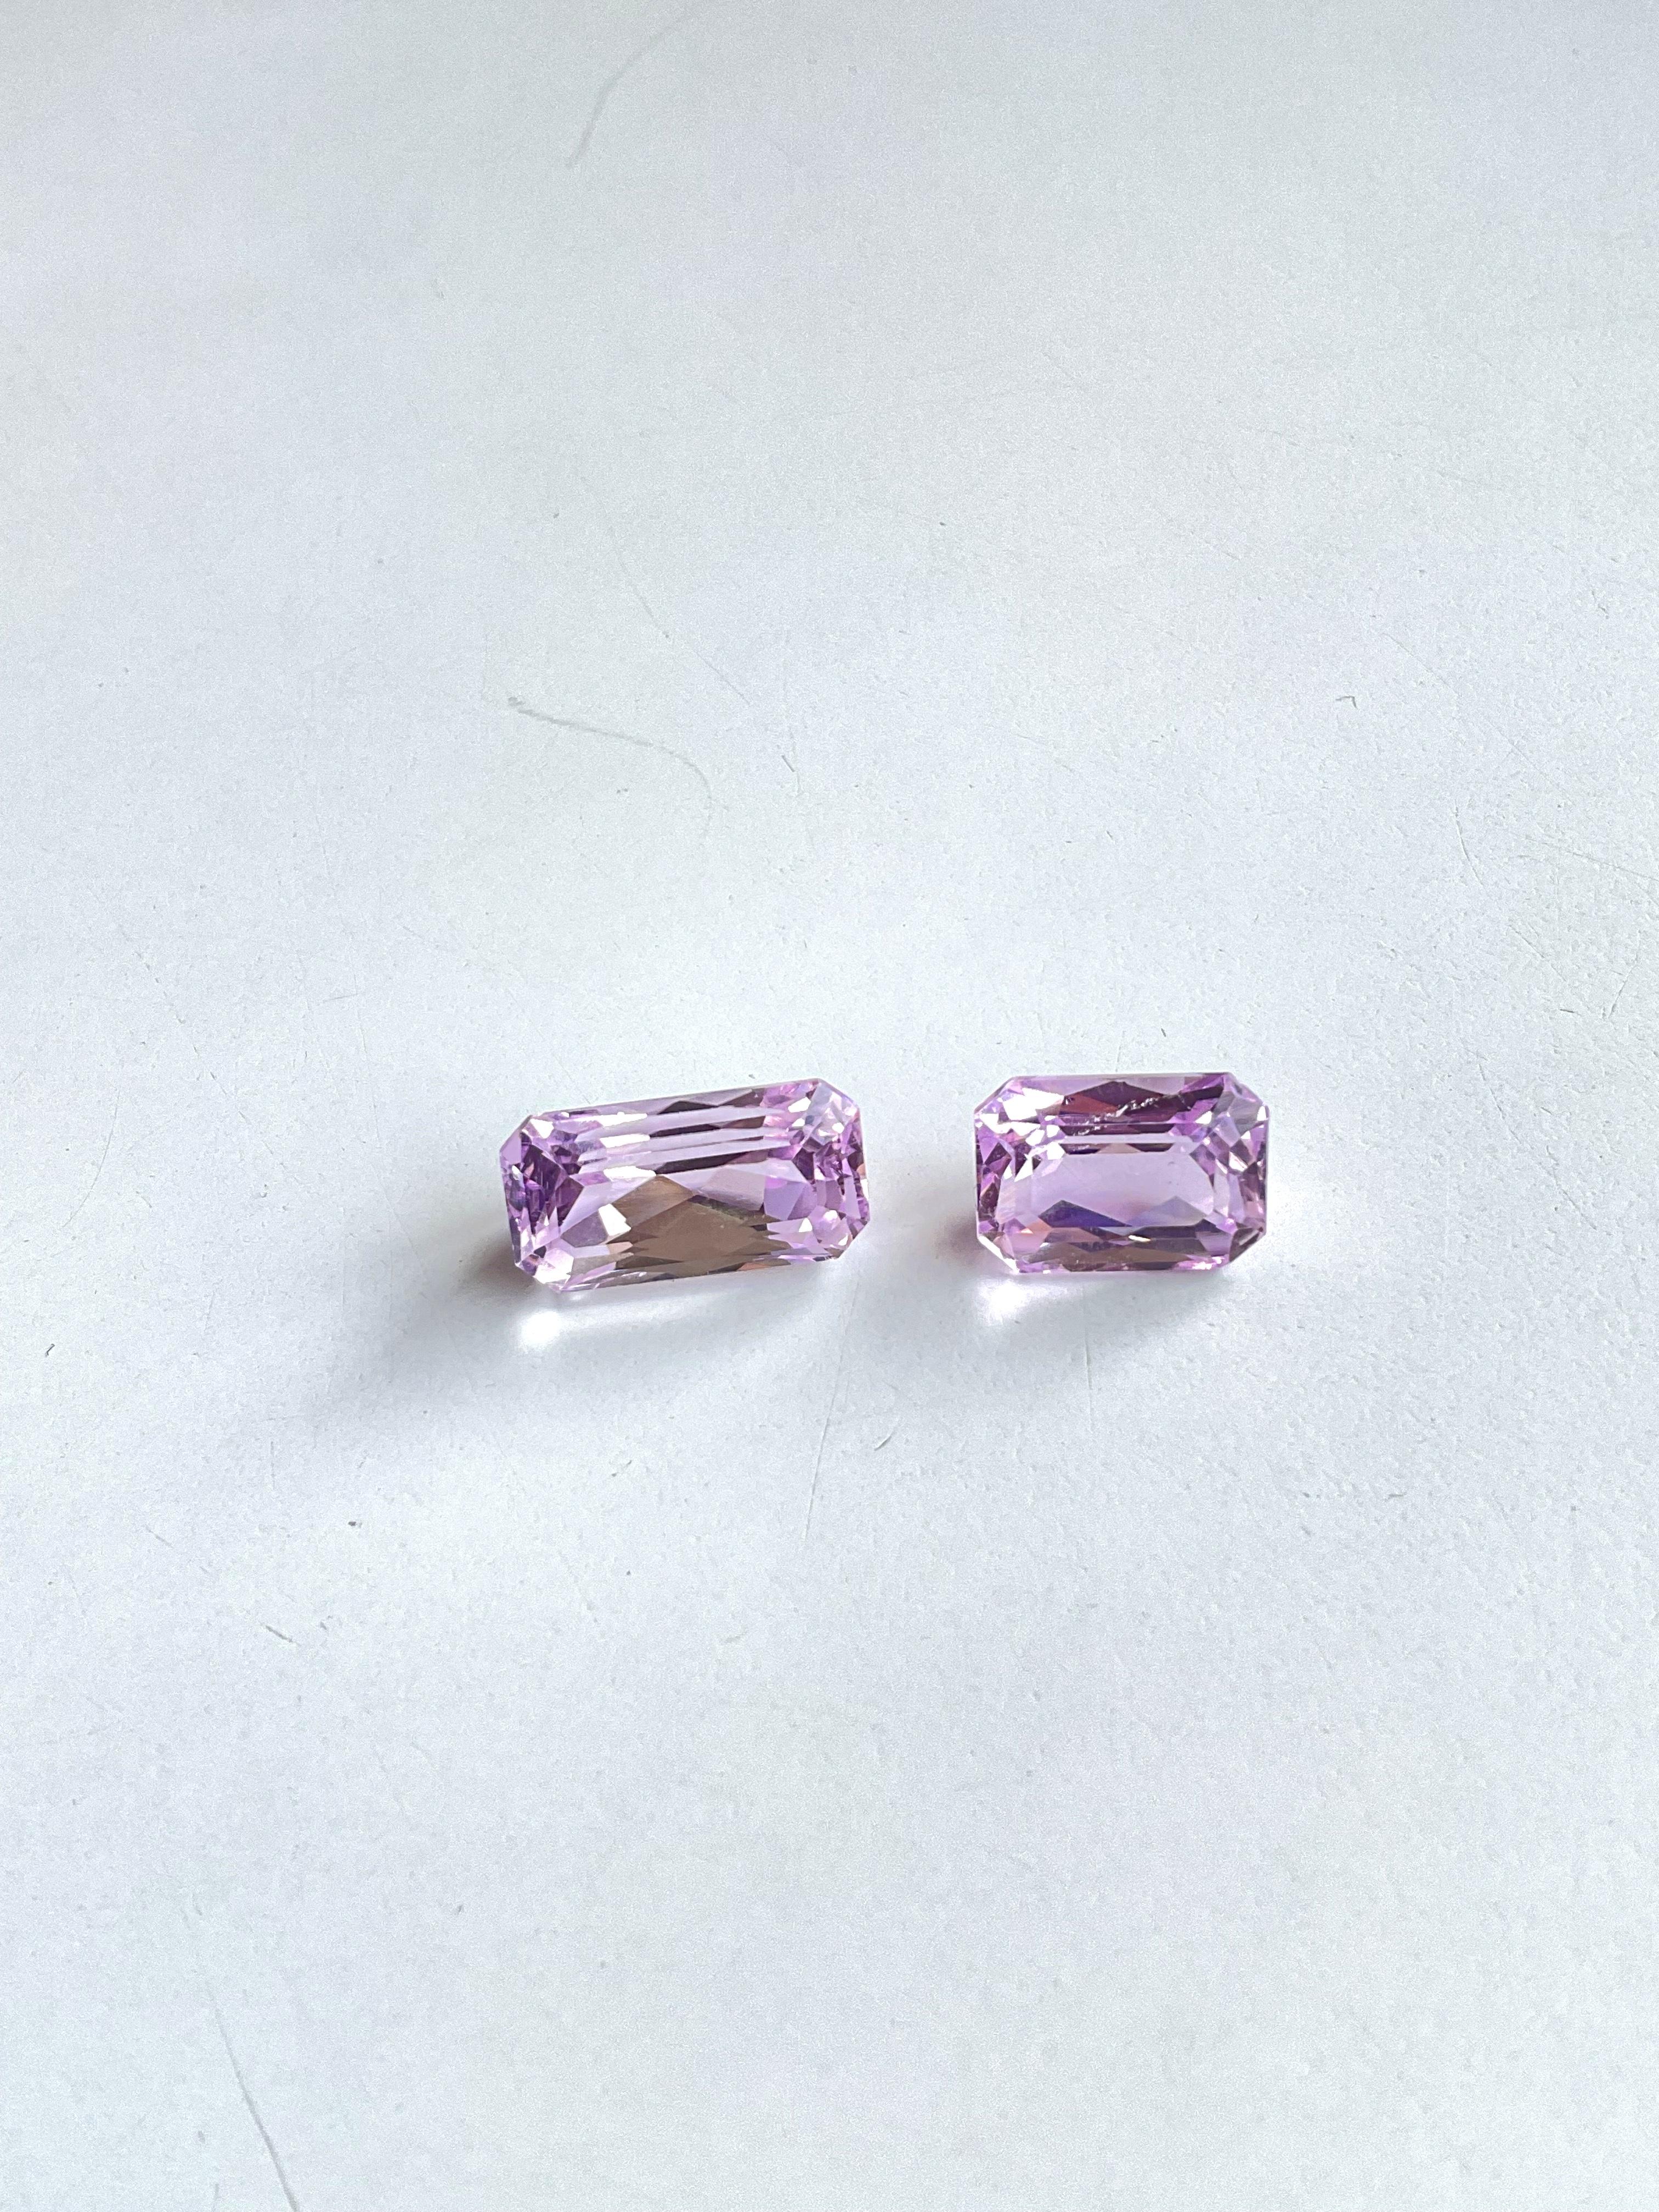 17.86 Carats Pink Kunzite Octagon Natural Cut Stones For Fine Gem Jewellery For Sale 2